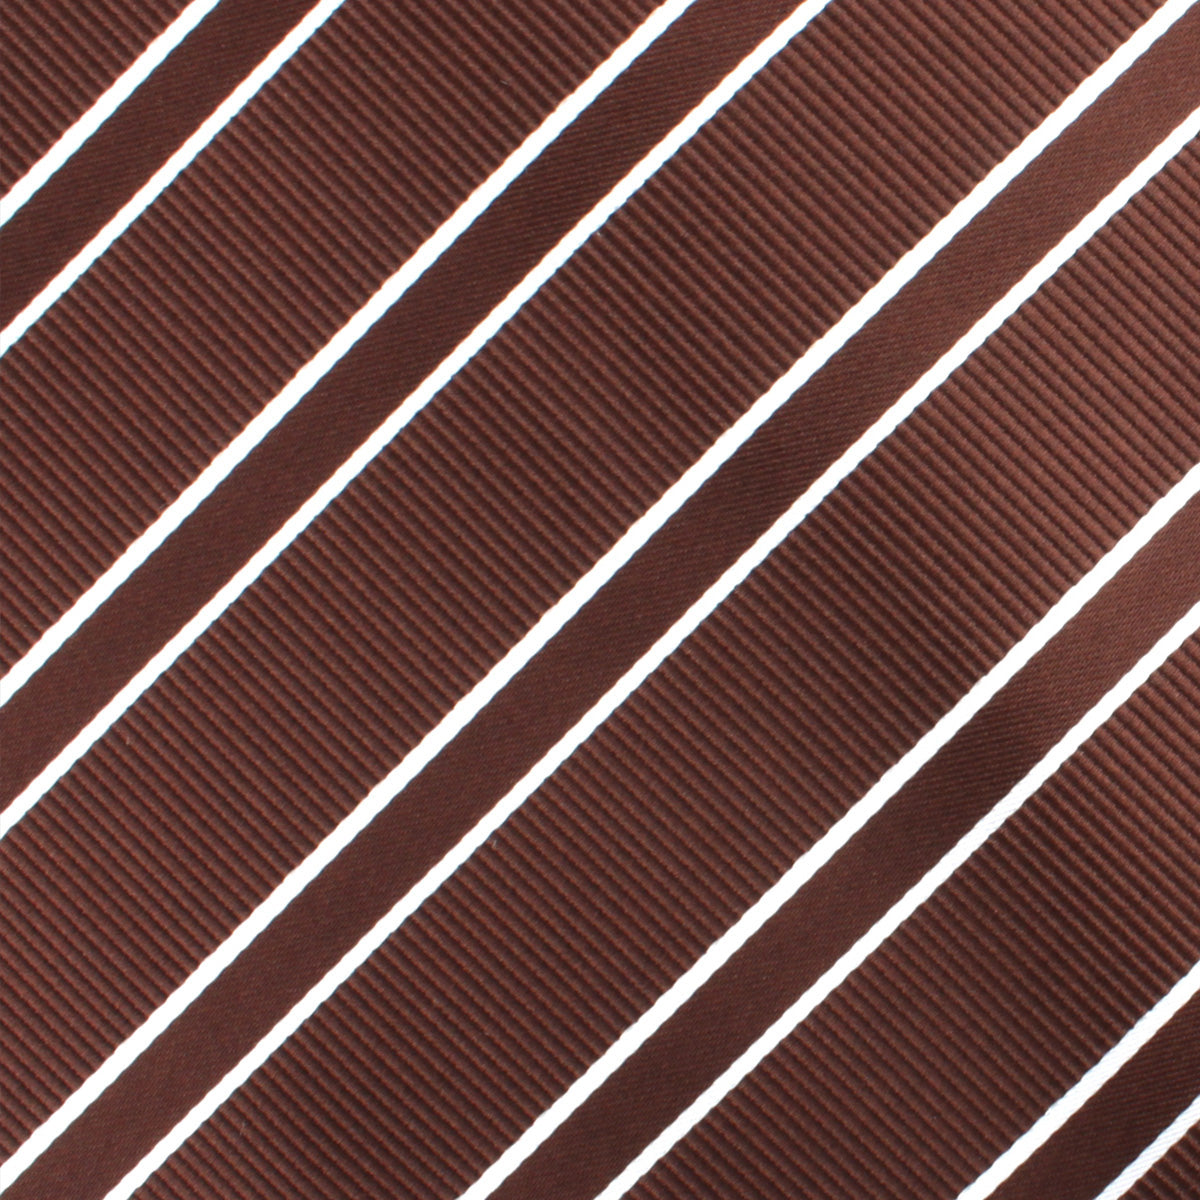 Chocolate Brown Double Stripe Fabric Swatch